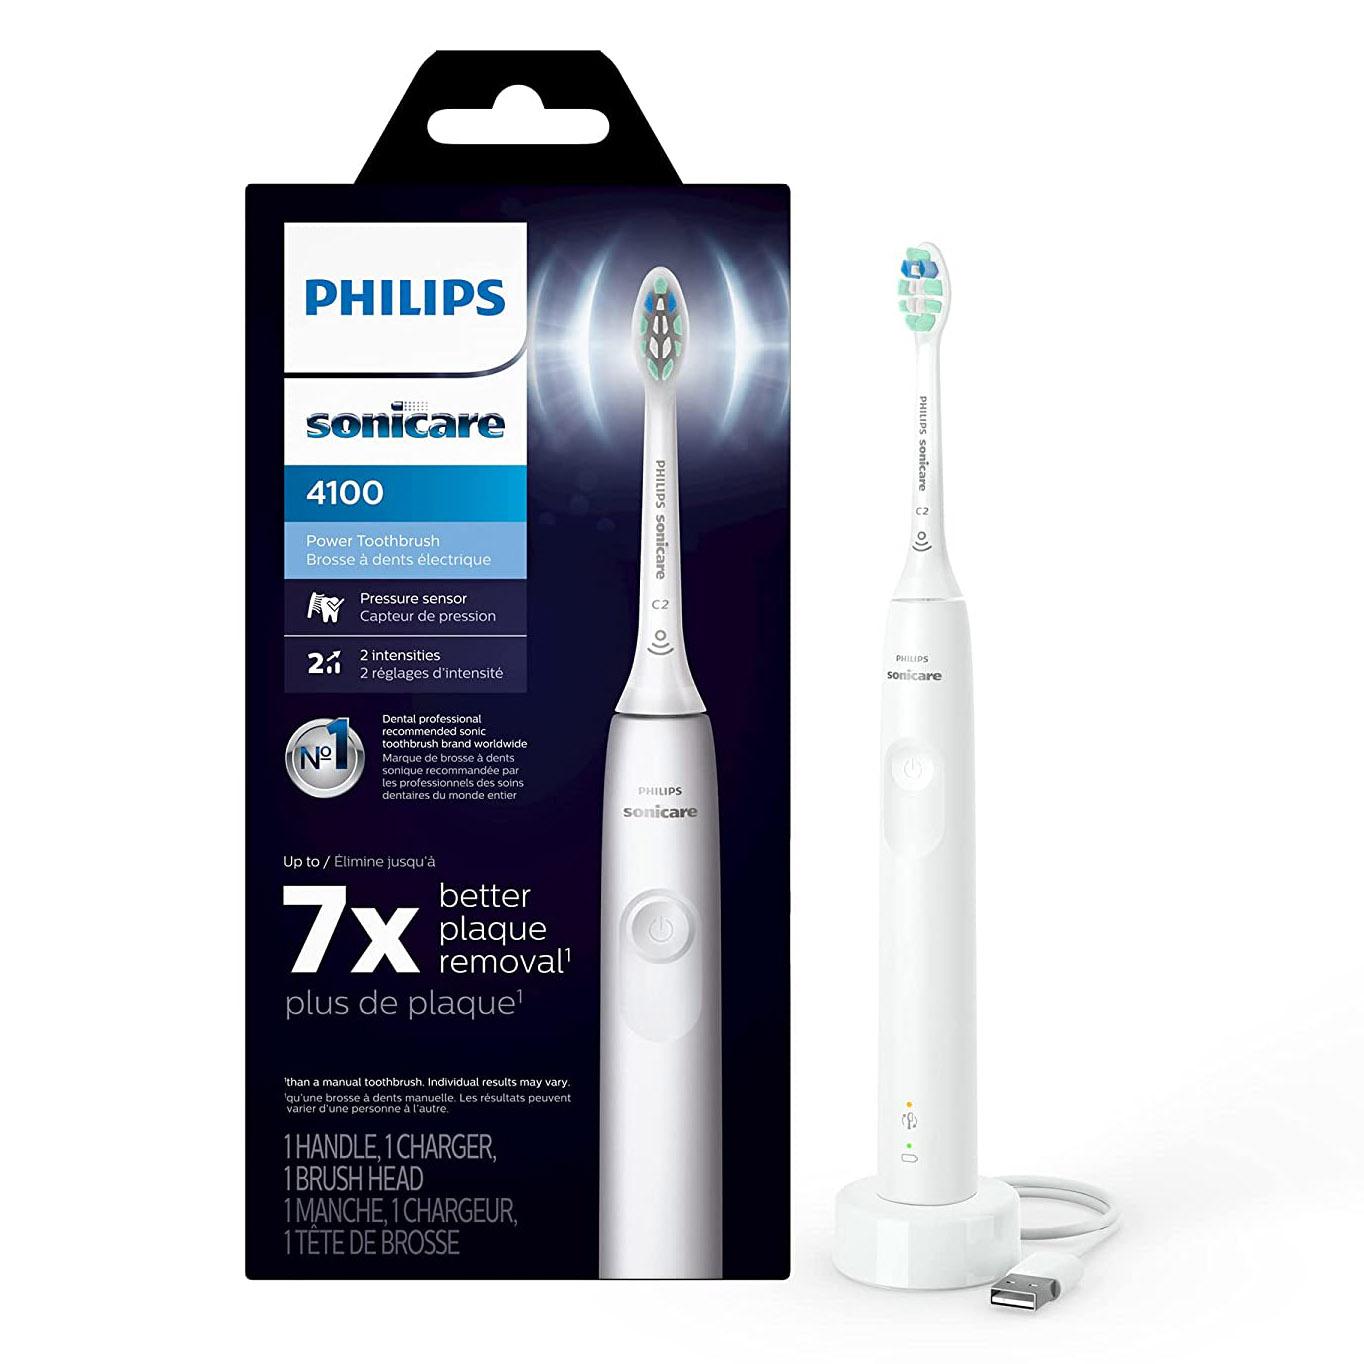 Philips Sonicare ProtectiveClean 4100 Rechargeable Electric Toothbrush for $35.75